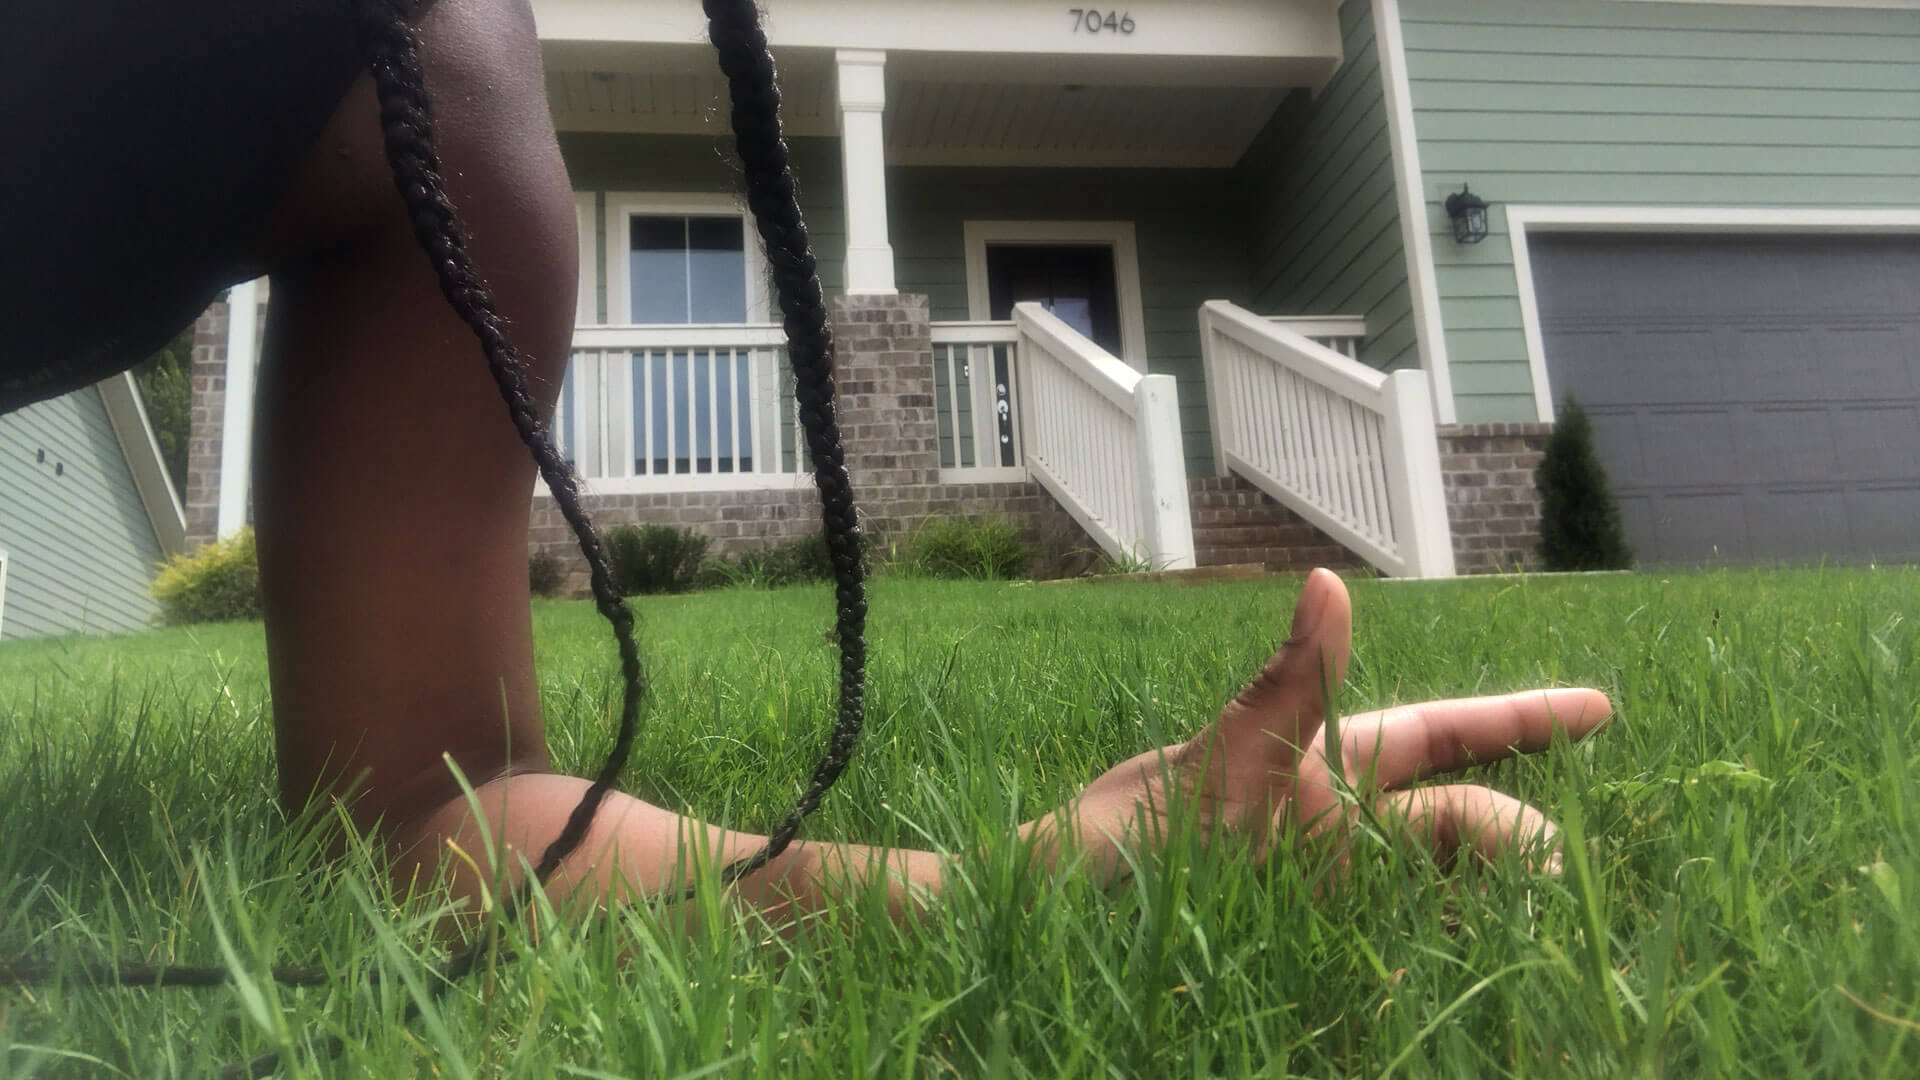 Picture of Black female of her left arm in 90 angle with forearm resting on bright green grass. Two dark braids fall to the grass, draping over her arm. In the background is a picture of a house with a white porch.